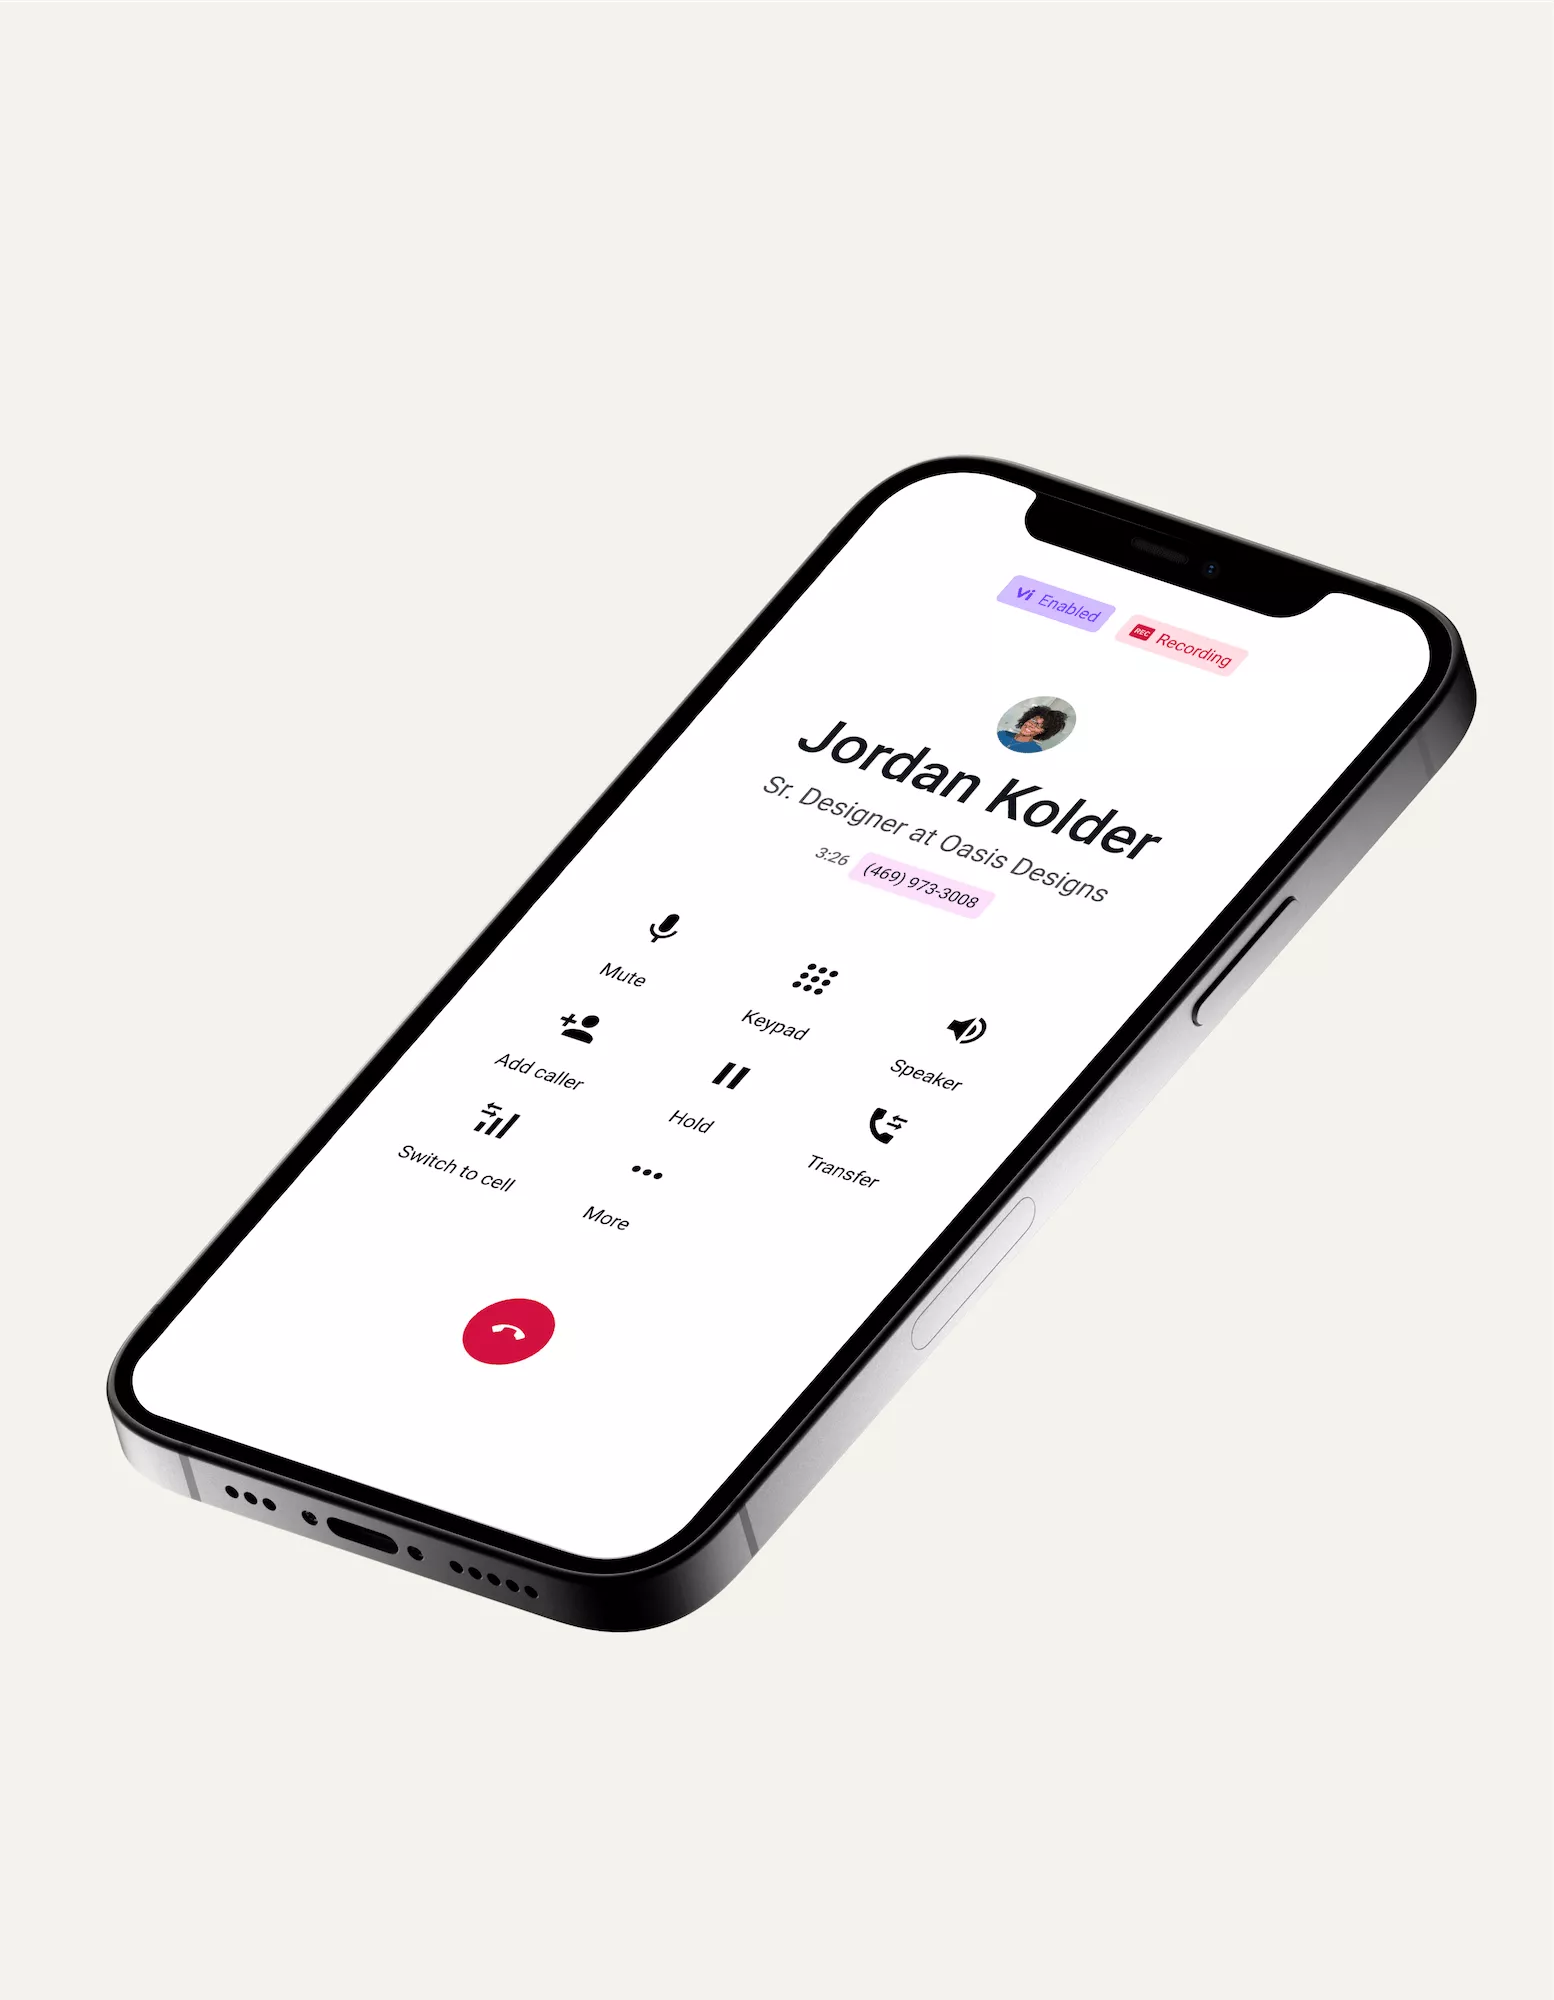 Mobile phone showing a call being made on Dialpad's app